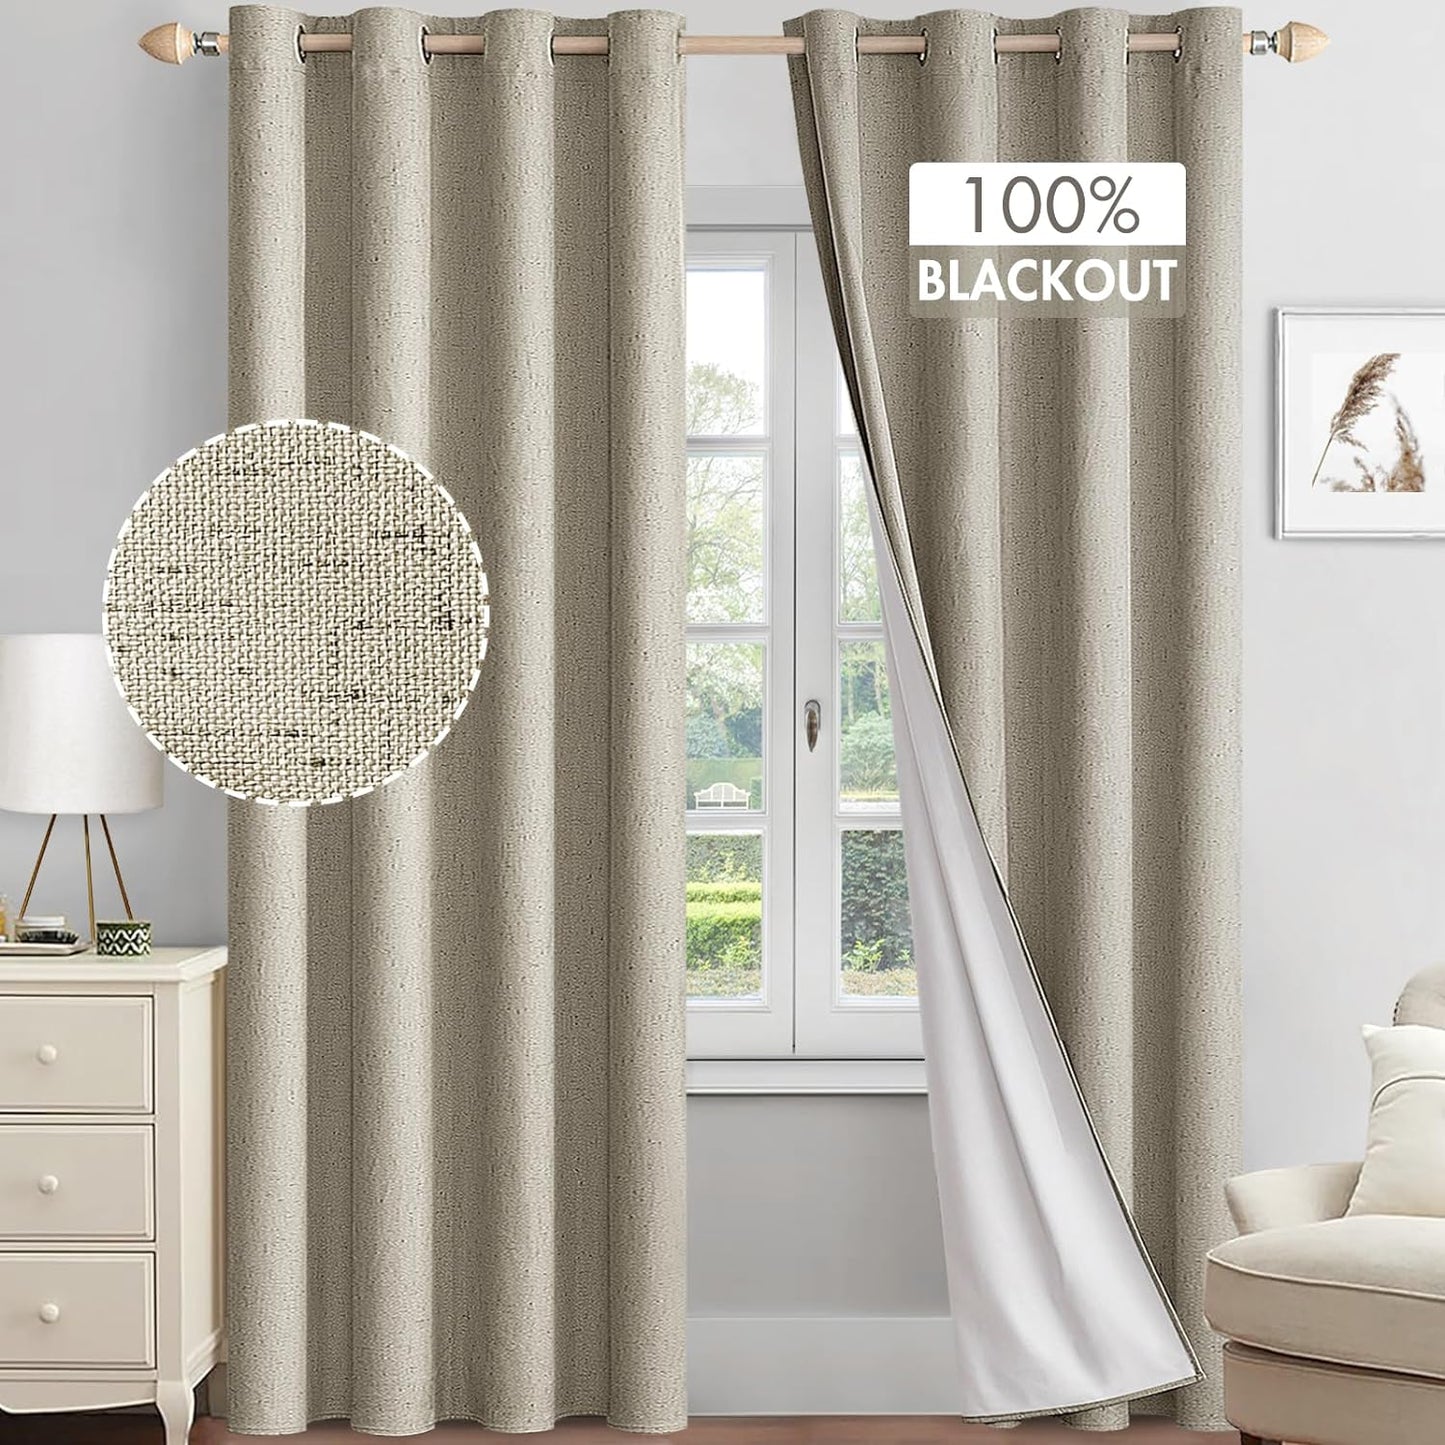 MIULEE Linen Textured 100% Blackout Curtains for Bedroom 84 Inches Long Natural Beige Thermal Insulated Black Out Curtains/Draperies with White Liner for Living Room/Nursery, Grommet Top, 2 Panels  MIULEE Stone W52Xl90 